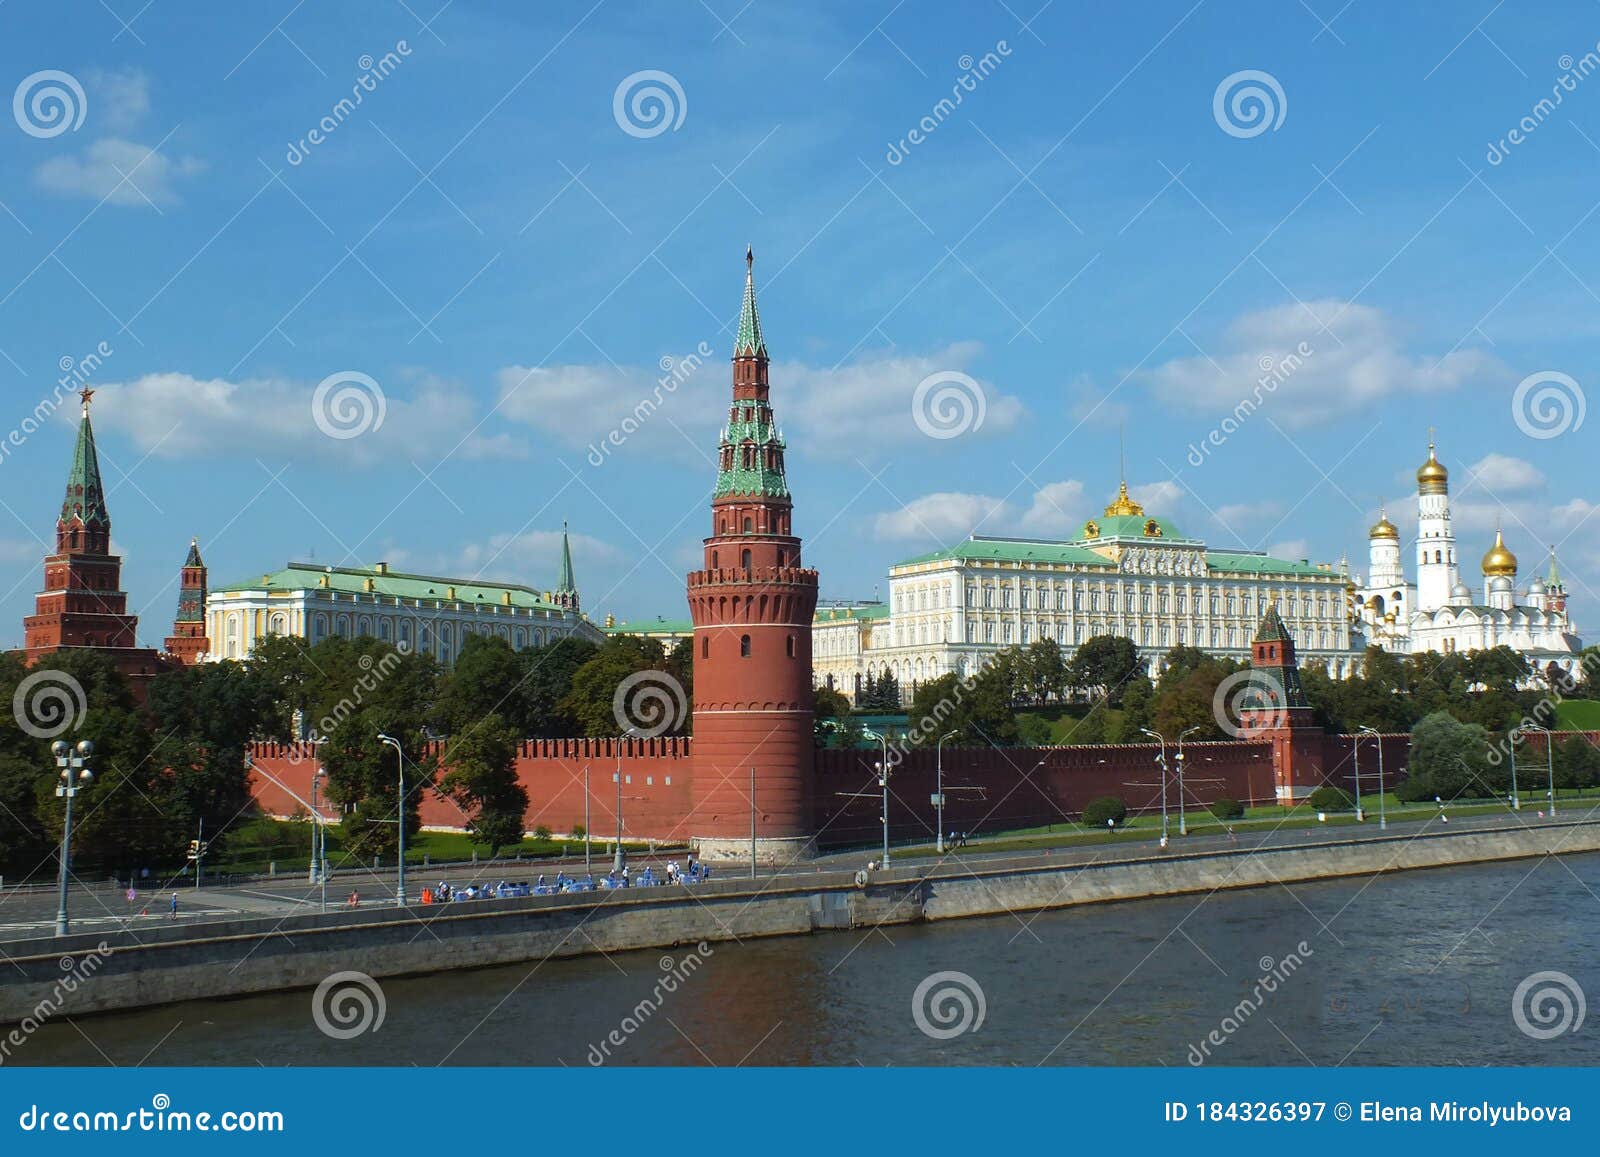 view of kremlin wall with towers and cathedrals photo made from opposite bank of the river moscow